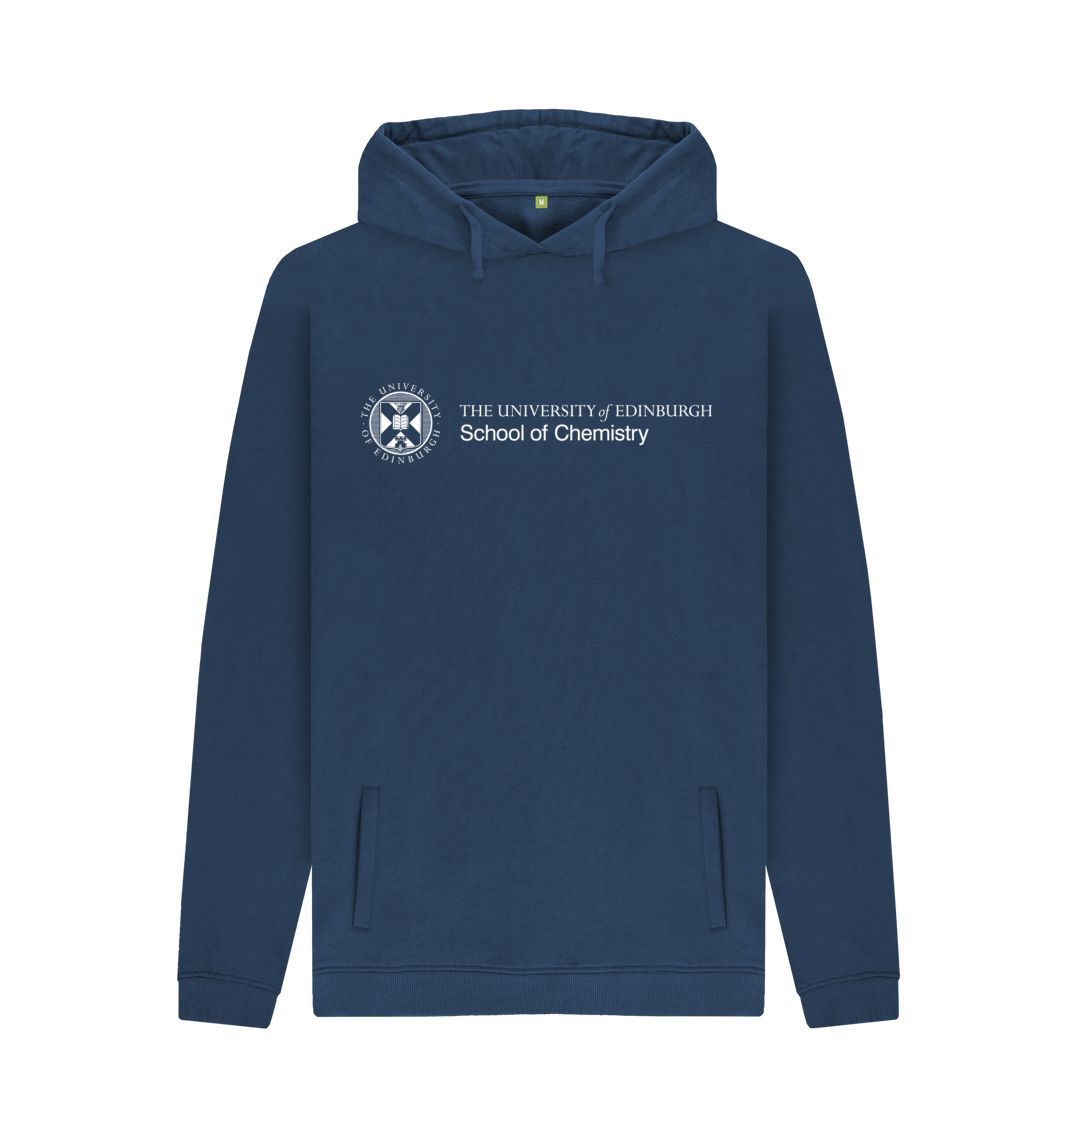 Navy hoodie with white University crest and text that reads ' University of Edinburgh School of Chemistry'